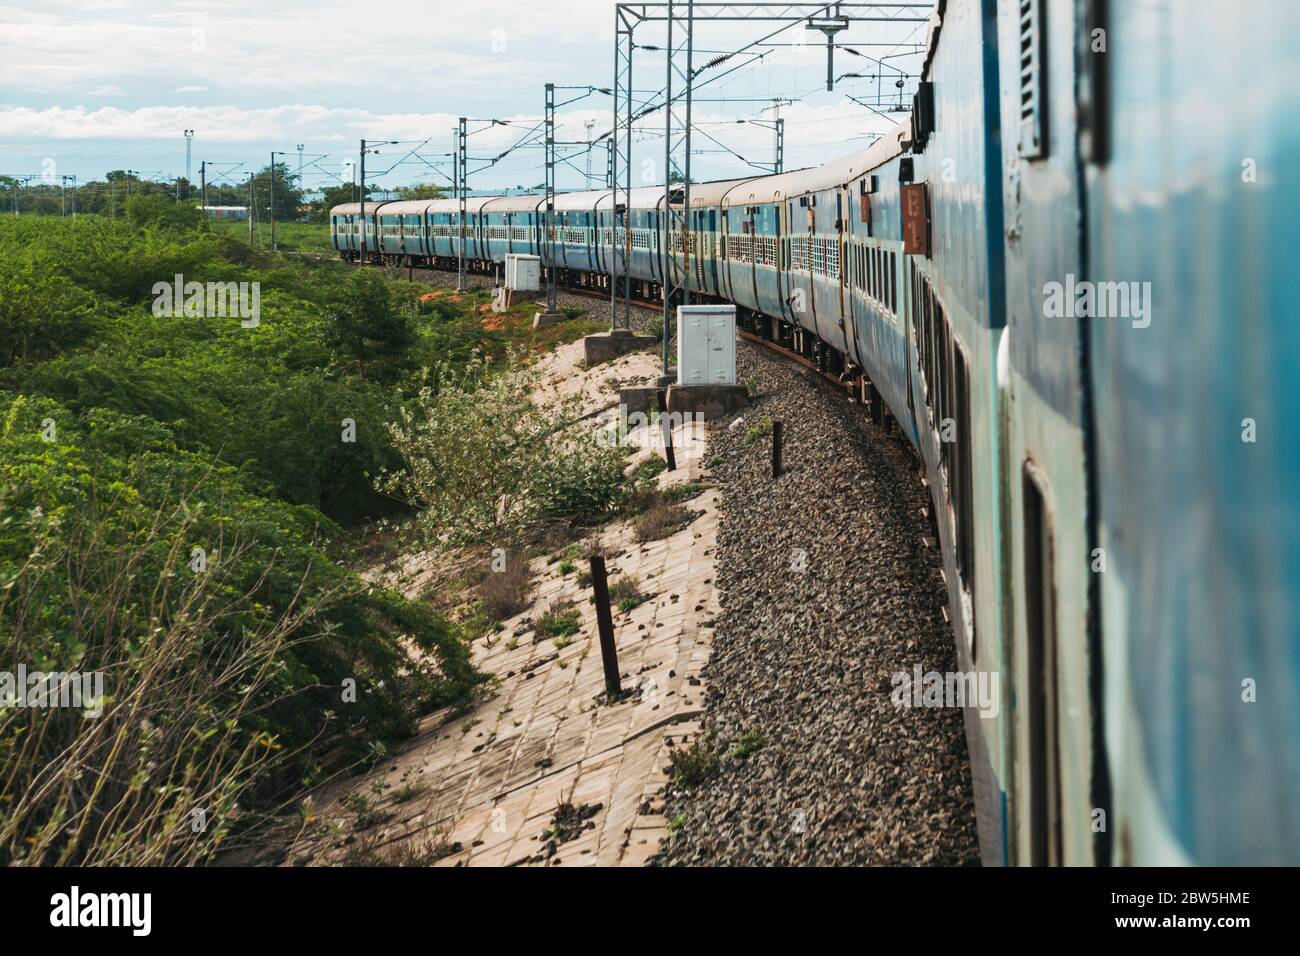 The view of the carriages from the train door as it rounds a bend approaching Madurai, Tamil Nadu, India Stock Photo